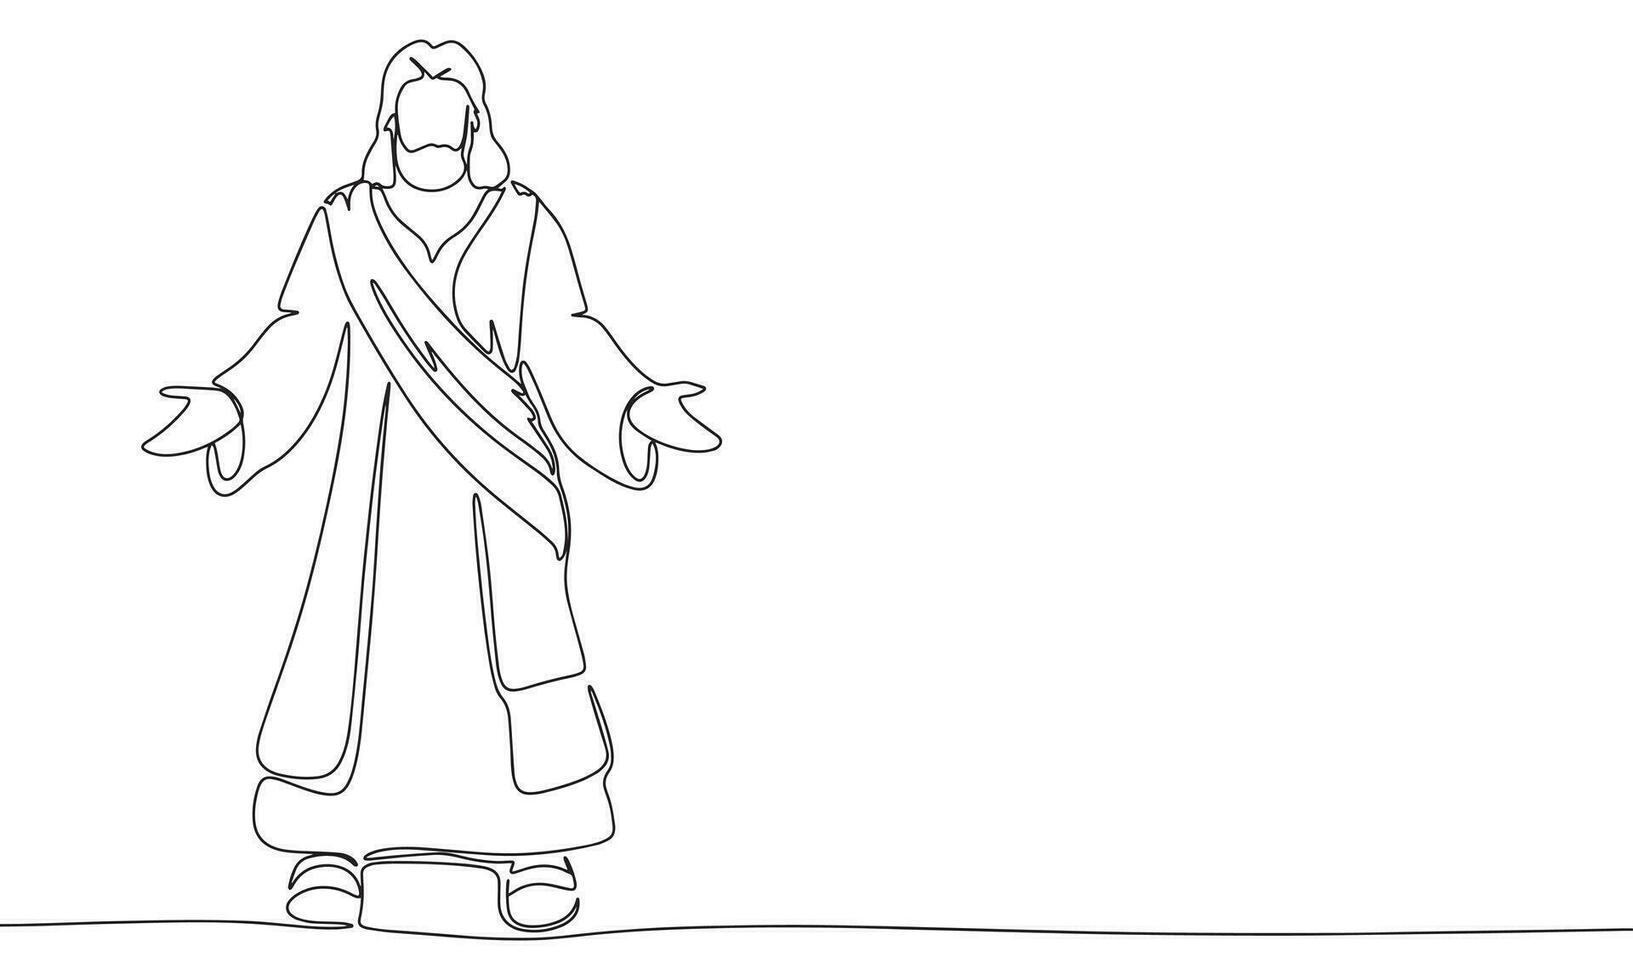 Continuous line drawing of Jesus, Black and white vector minimalist illustration of religion concept